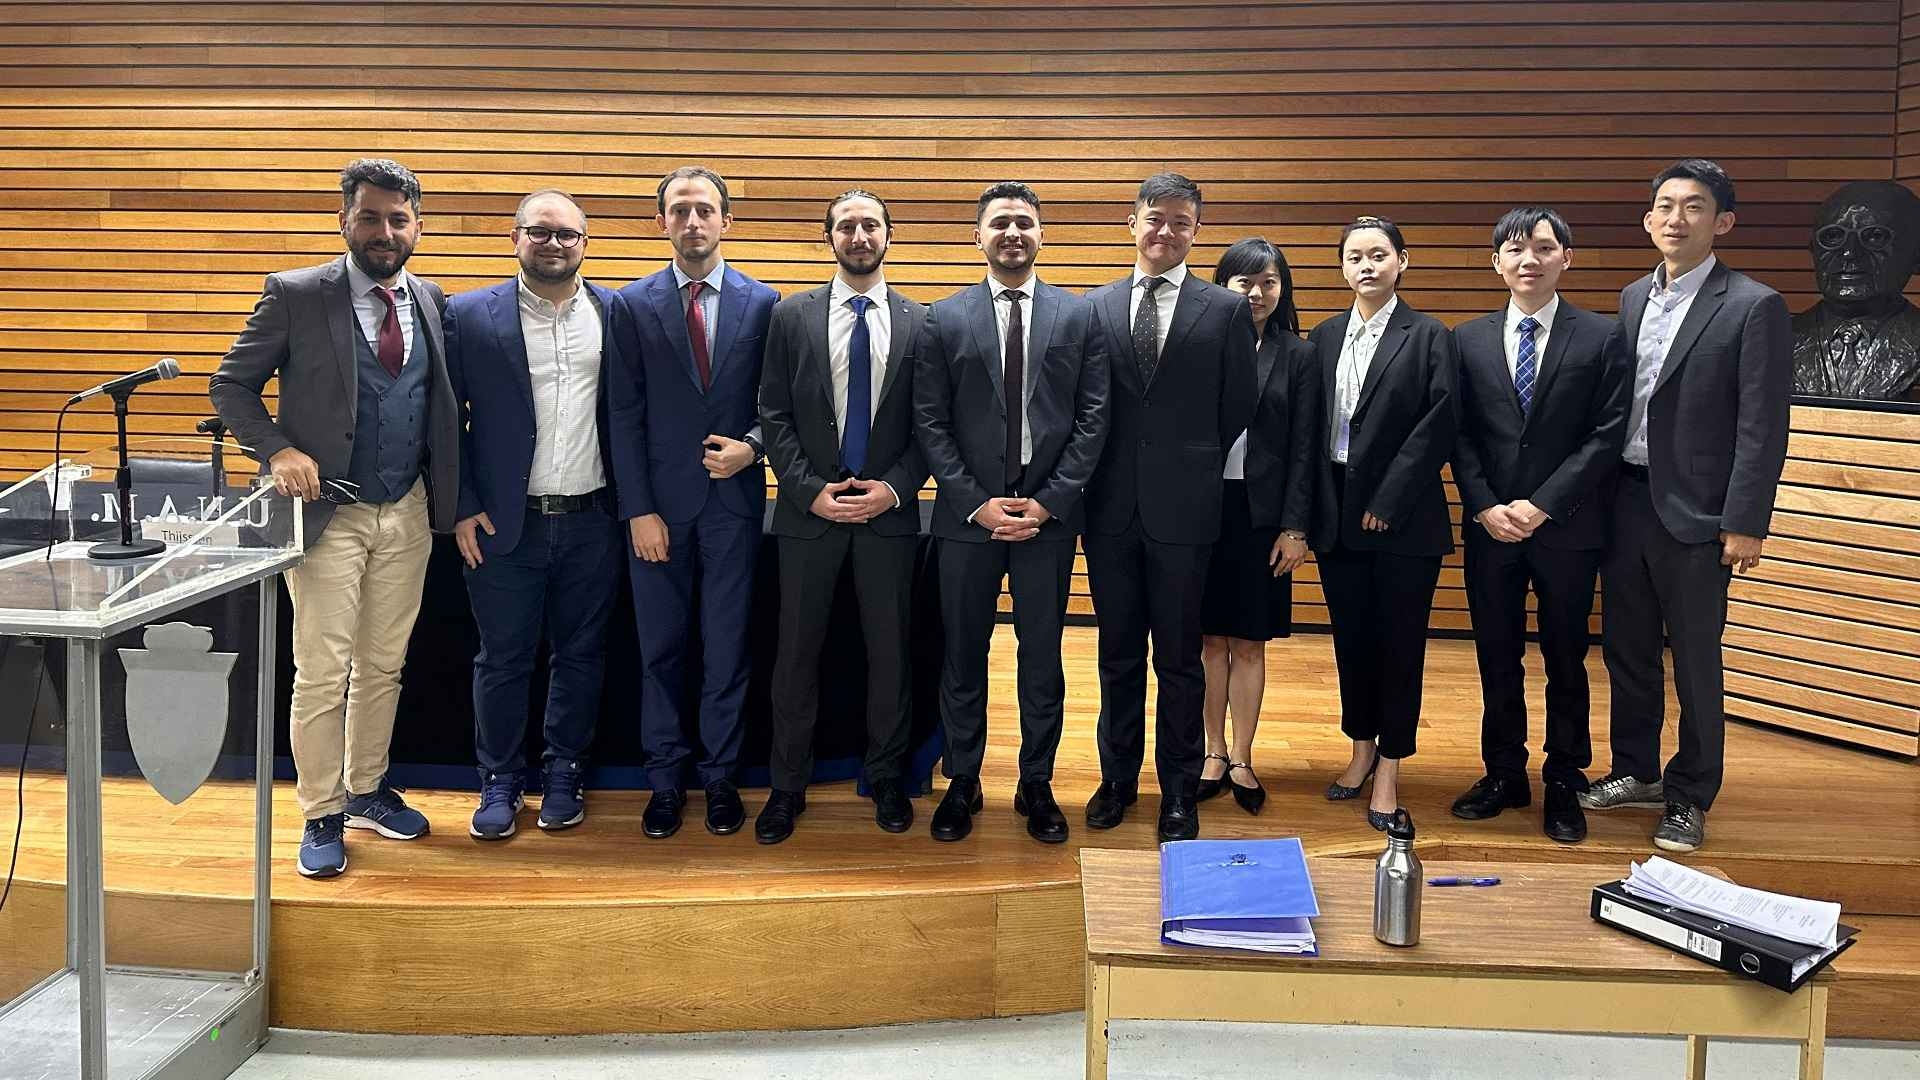 Our Students Participated in the International Air Law Moot Court ...